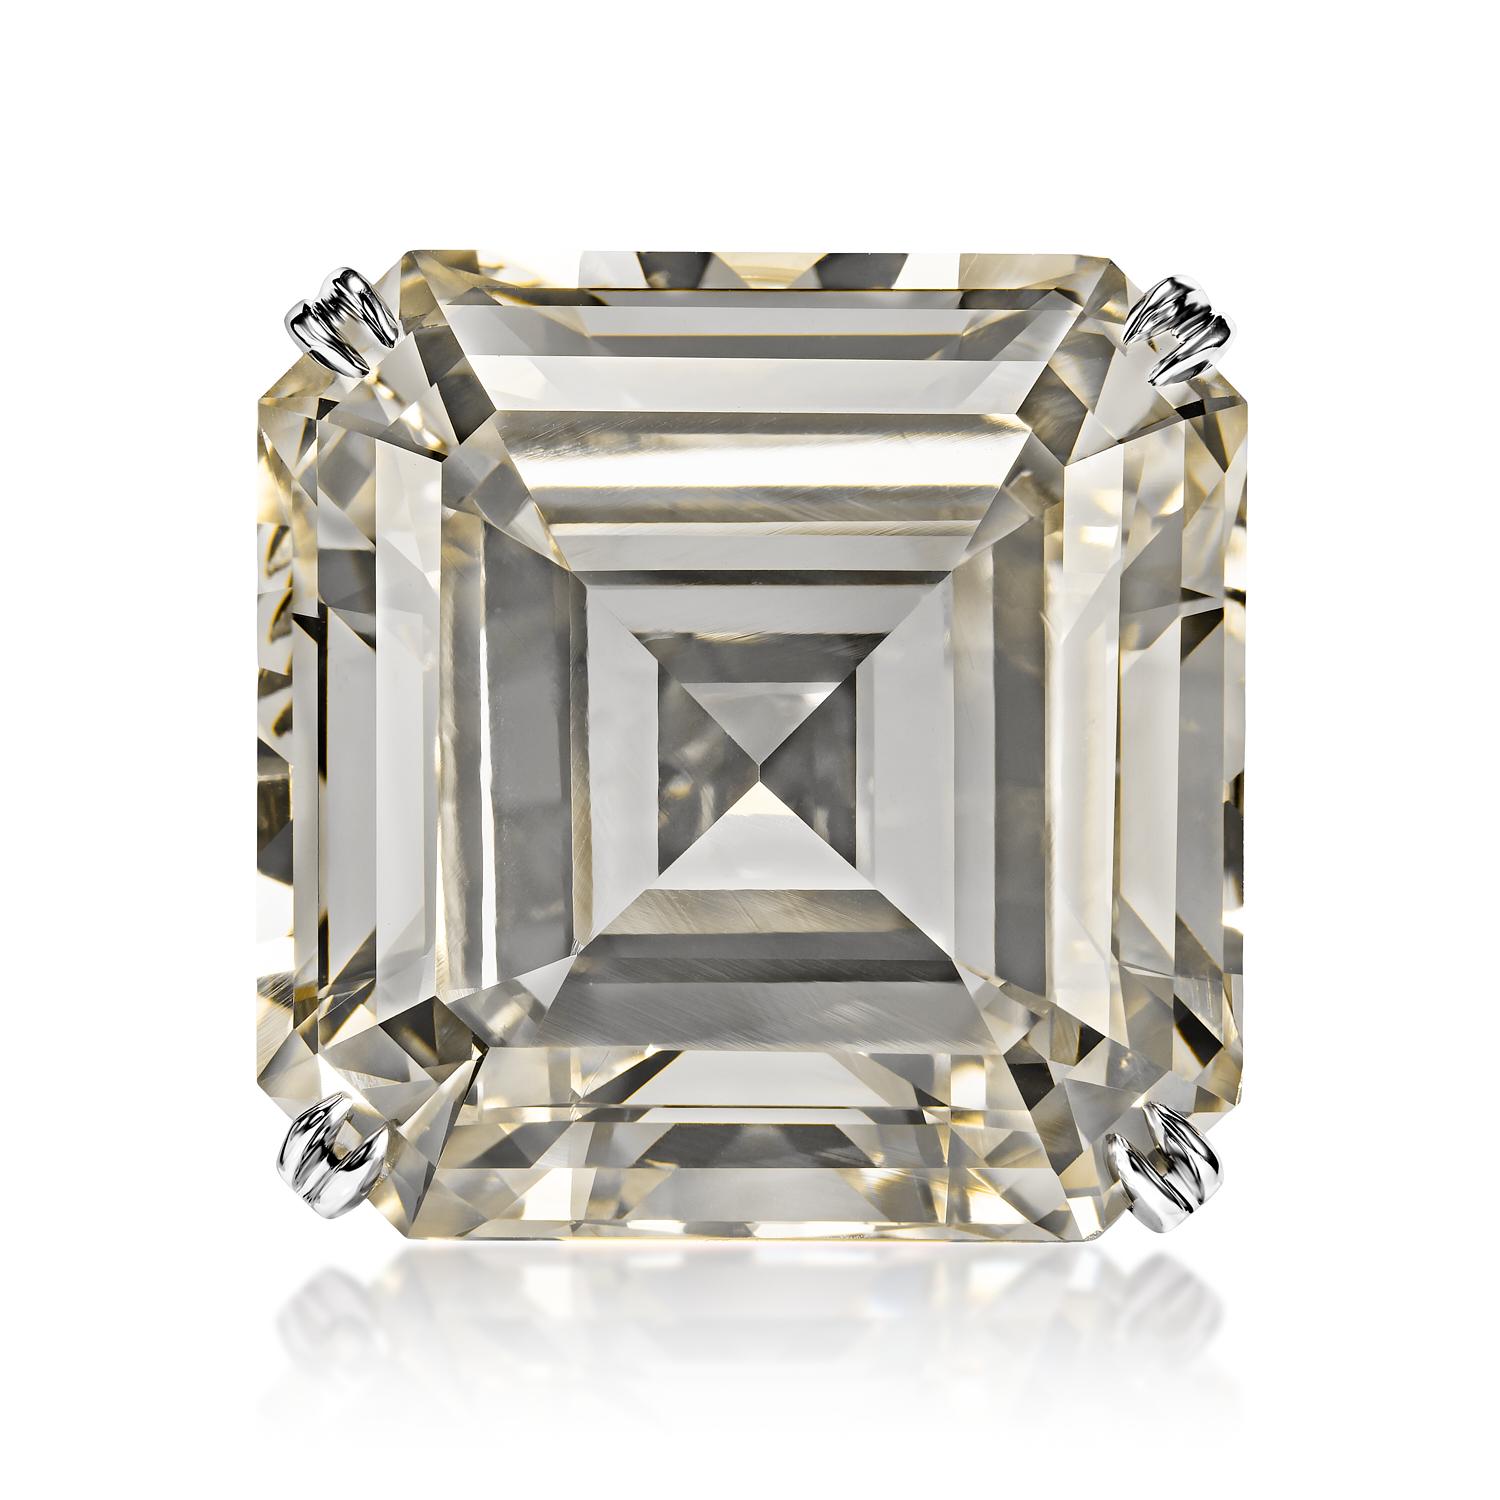 Treasure 64 Carat O-P SI1 Asscher Cut Diamond Solitaire Engagement Ring

GIA CERTIFIED
Center Diamond:

Carat Weight: 63.85 Carats
Color : O to P range
Clarity: SI1
Style: Asscher Cut
Approximate Measurements: 23.07 x 22.85 x 14.67